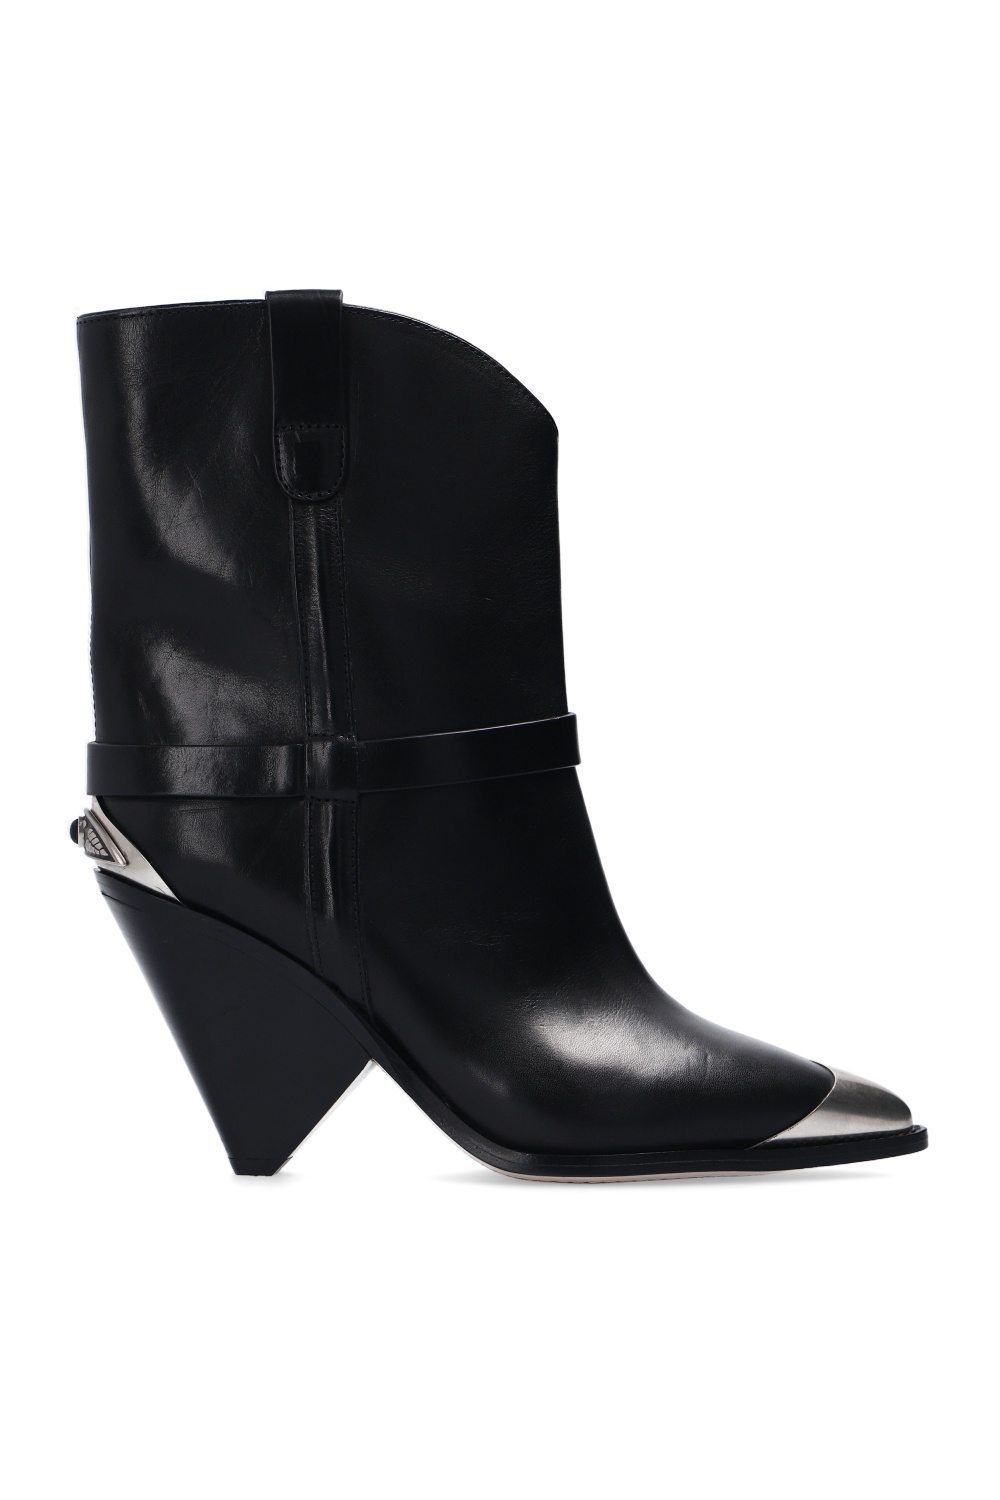 Isabel Marant ‘Lamsy’ heeled ankle Gifts boots